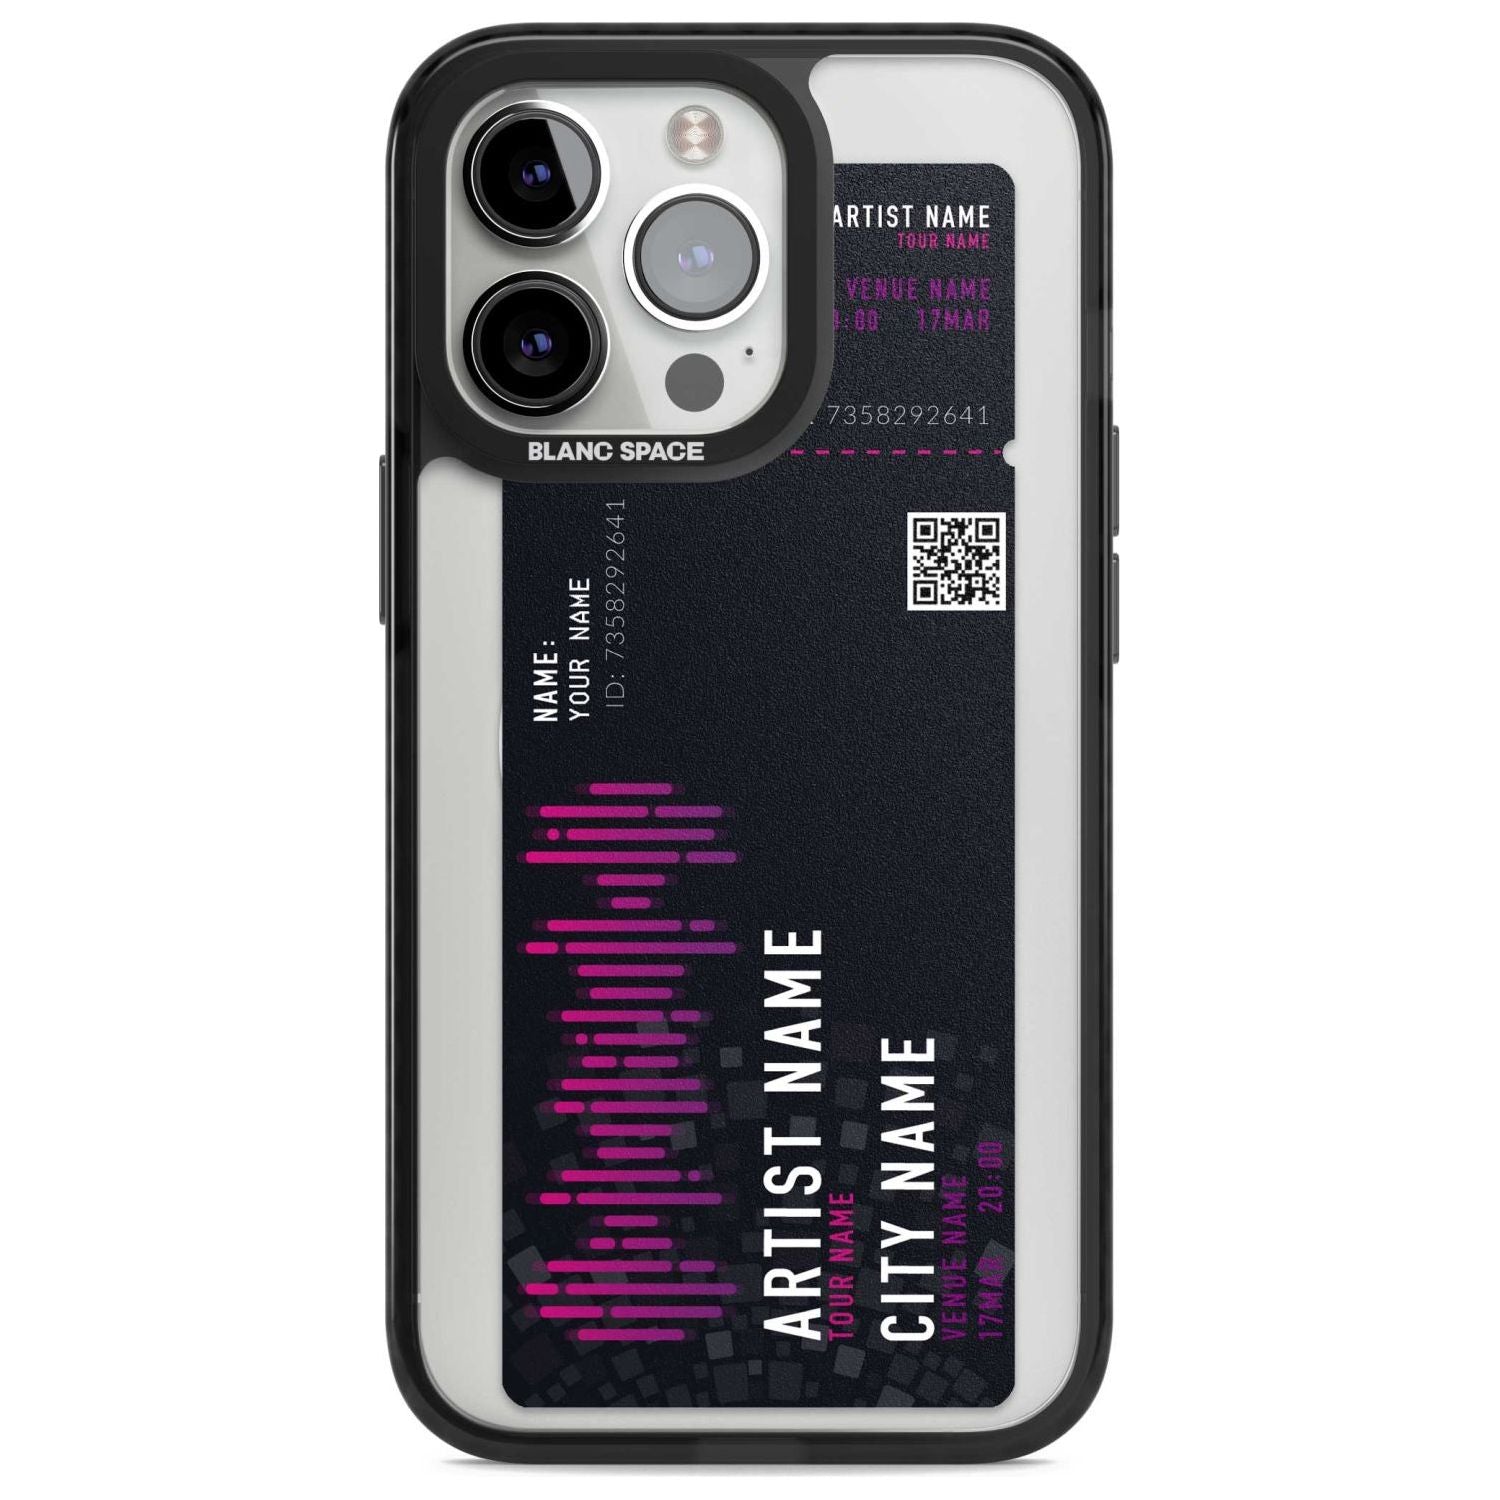 Personalised Concert Ticket Custom Phone Case iPhone 15 Pro Max / Magsafe Black Impact Case,iPhone 15 Pro / Magsafe Black Impact Case,iPhone 14 Pro Max / Magsafe Black Impact Case,iPhone 14 Pro / Magsafe Black Impact Case,iPhone 13 Pro / Magsafe Black Impact Case Blanc Space